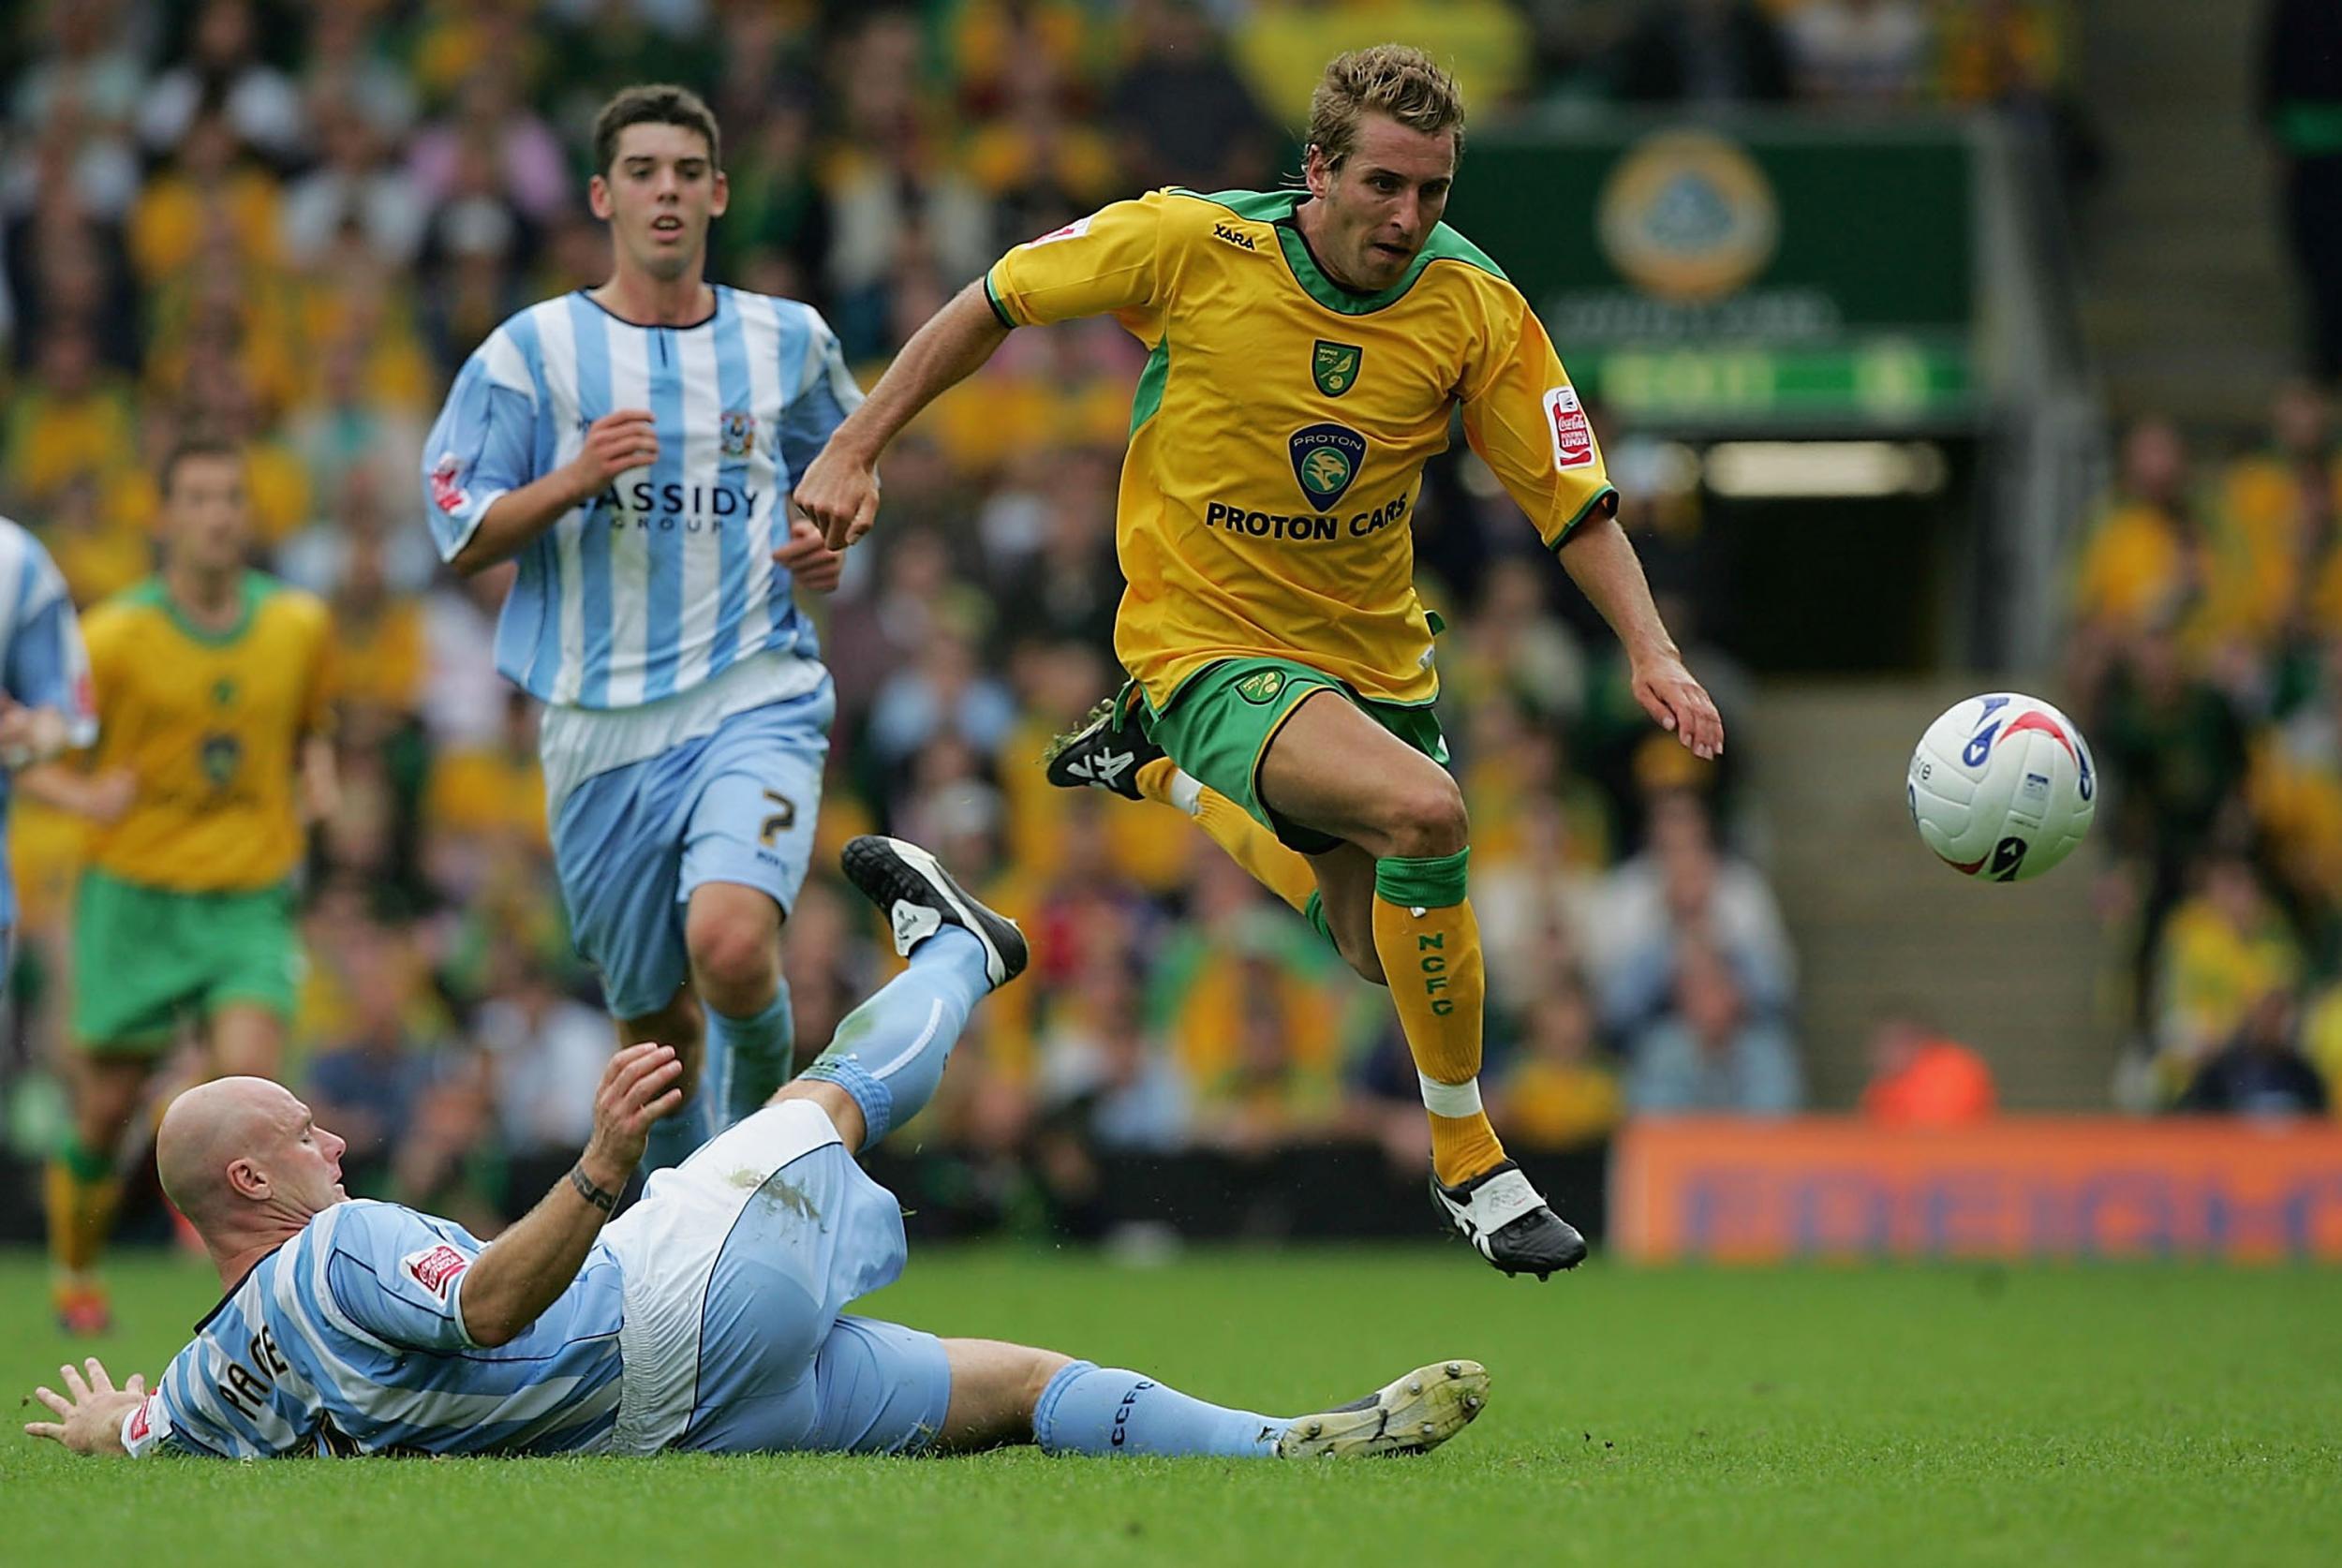 Darren Huckerby became a hugely popular figure at Norwich City